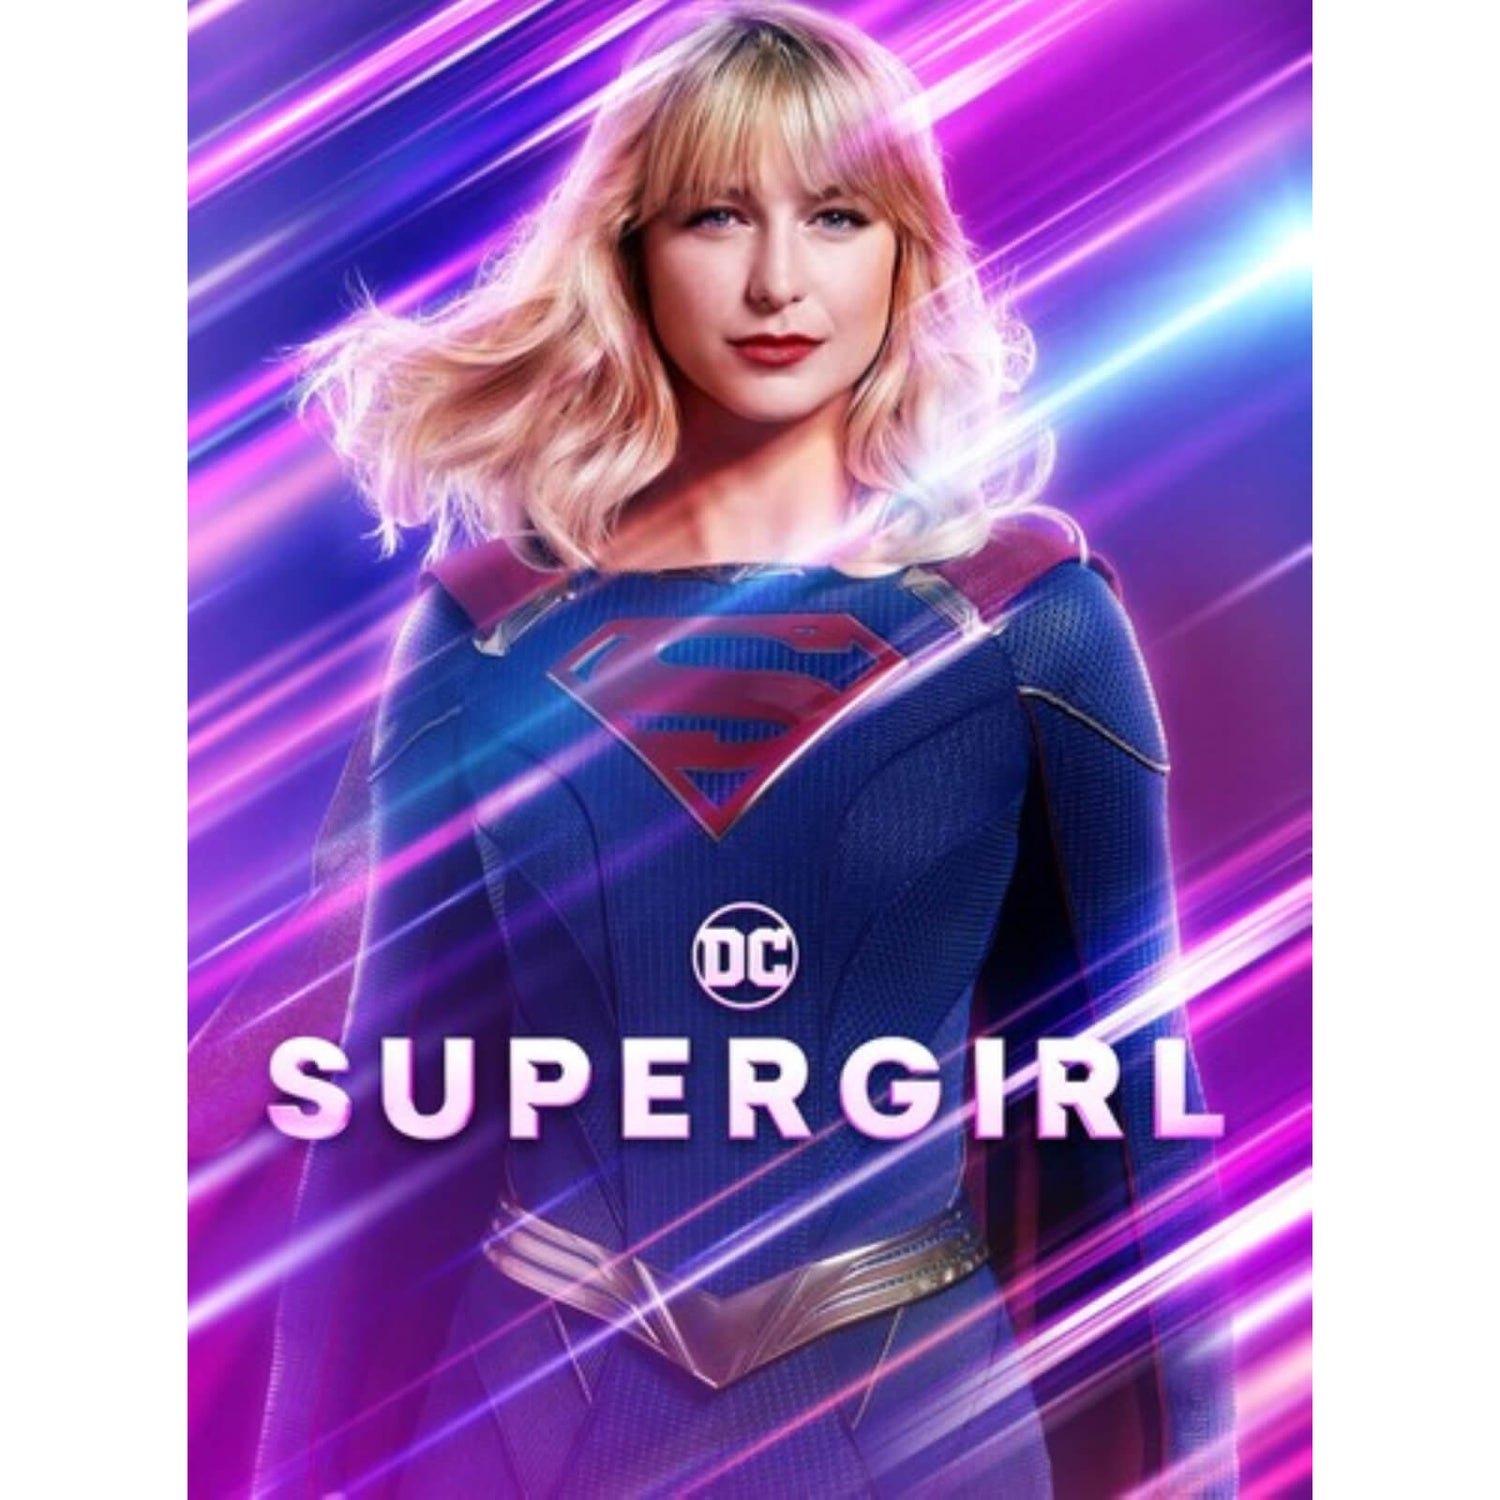 Supergirl: The Complete Series